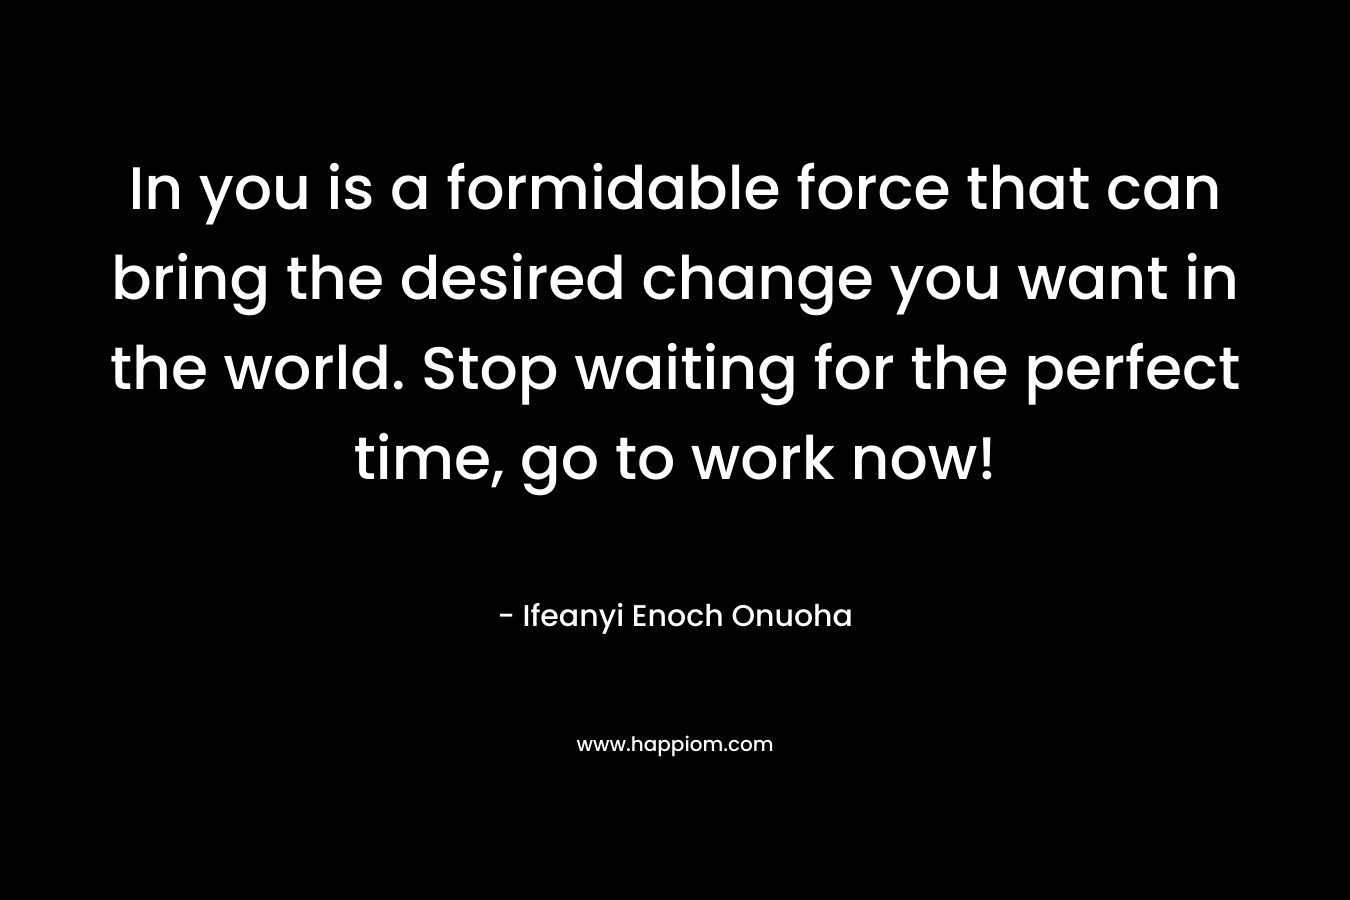 In you is a formidable force that can bring the desired change you want in the world. Stop waiting for the perfect time, go to work now!